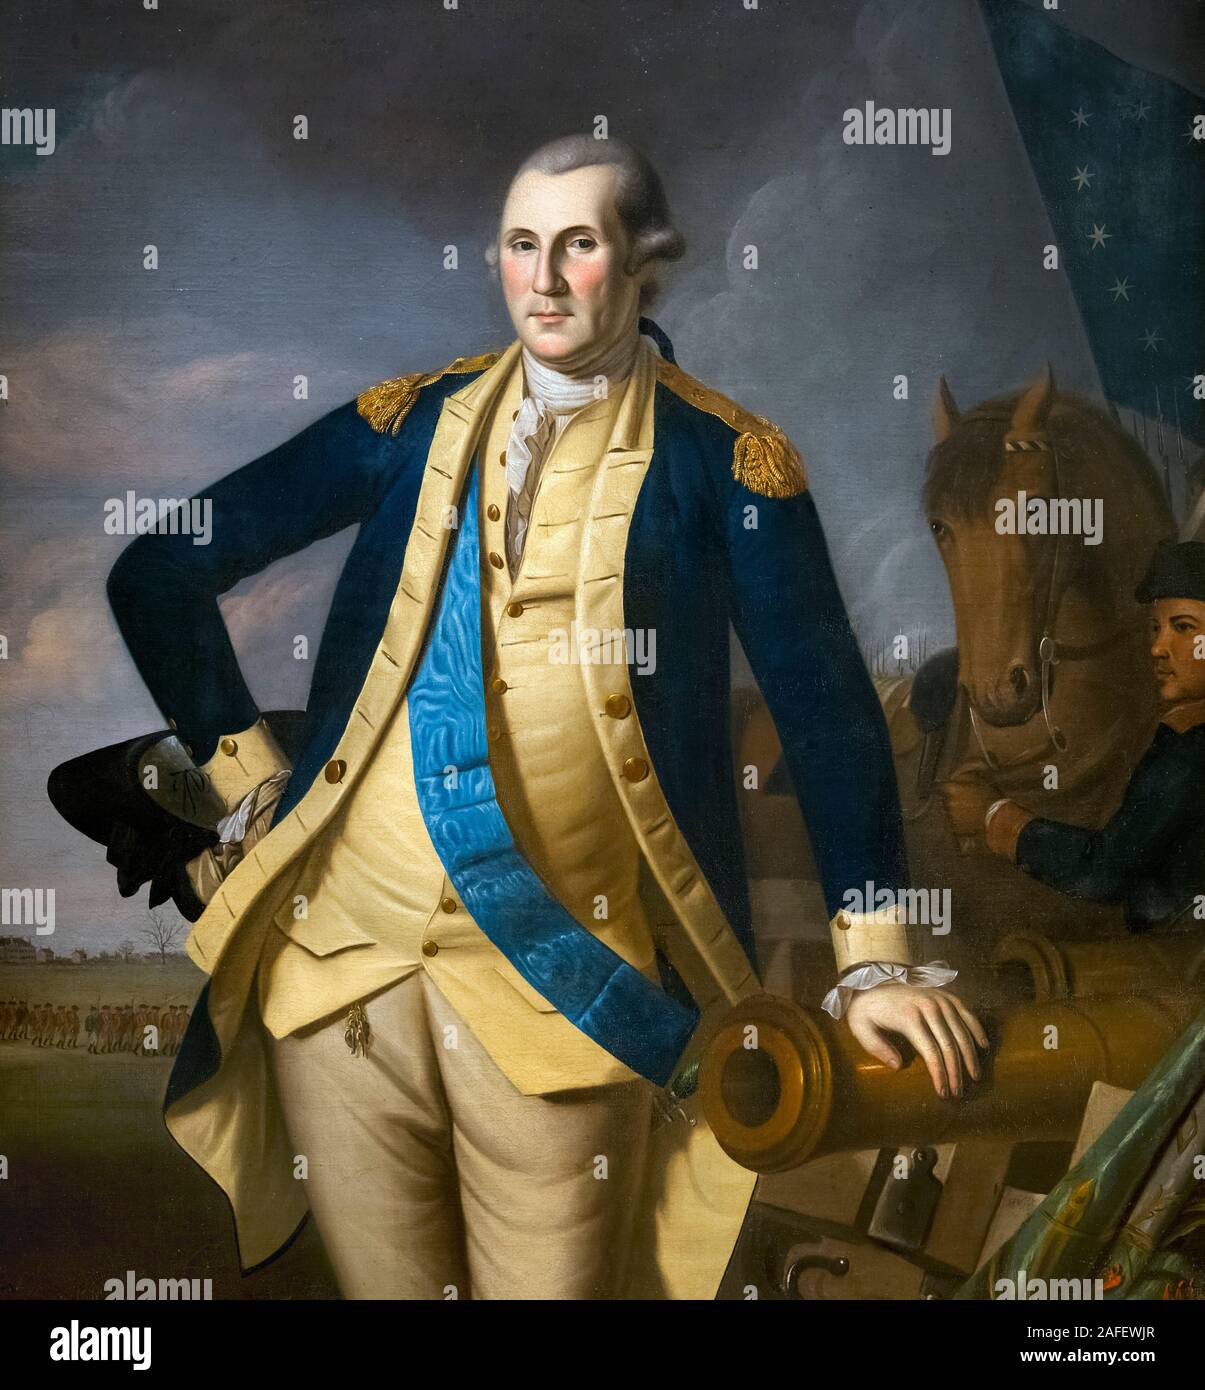 George Washington at the Battle of Princeton by Charles Willson Peale, oil on canvas, c.1779 Stock Photo